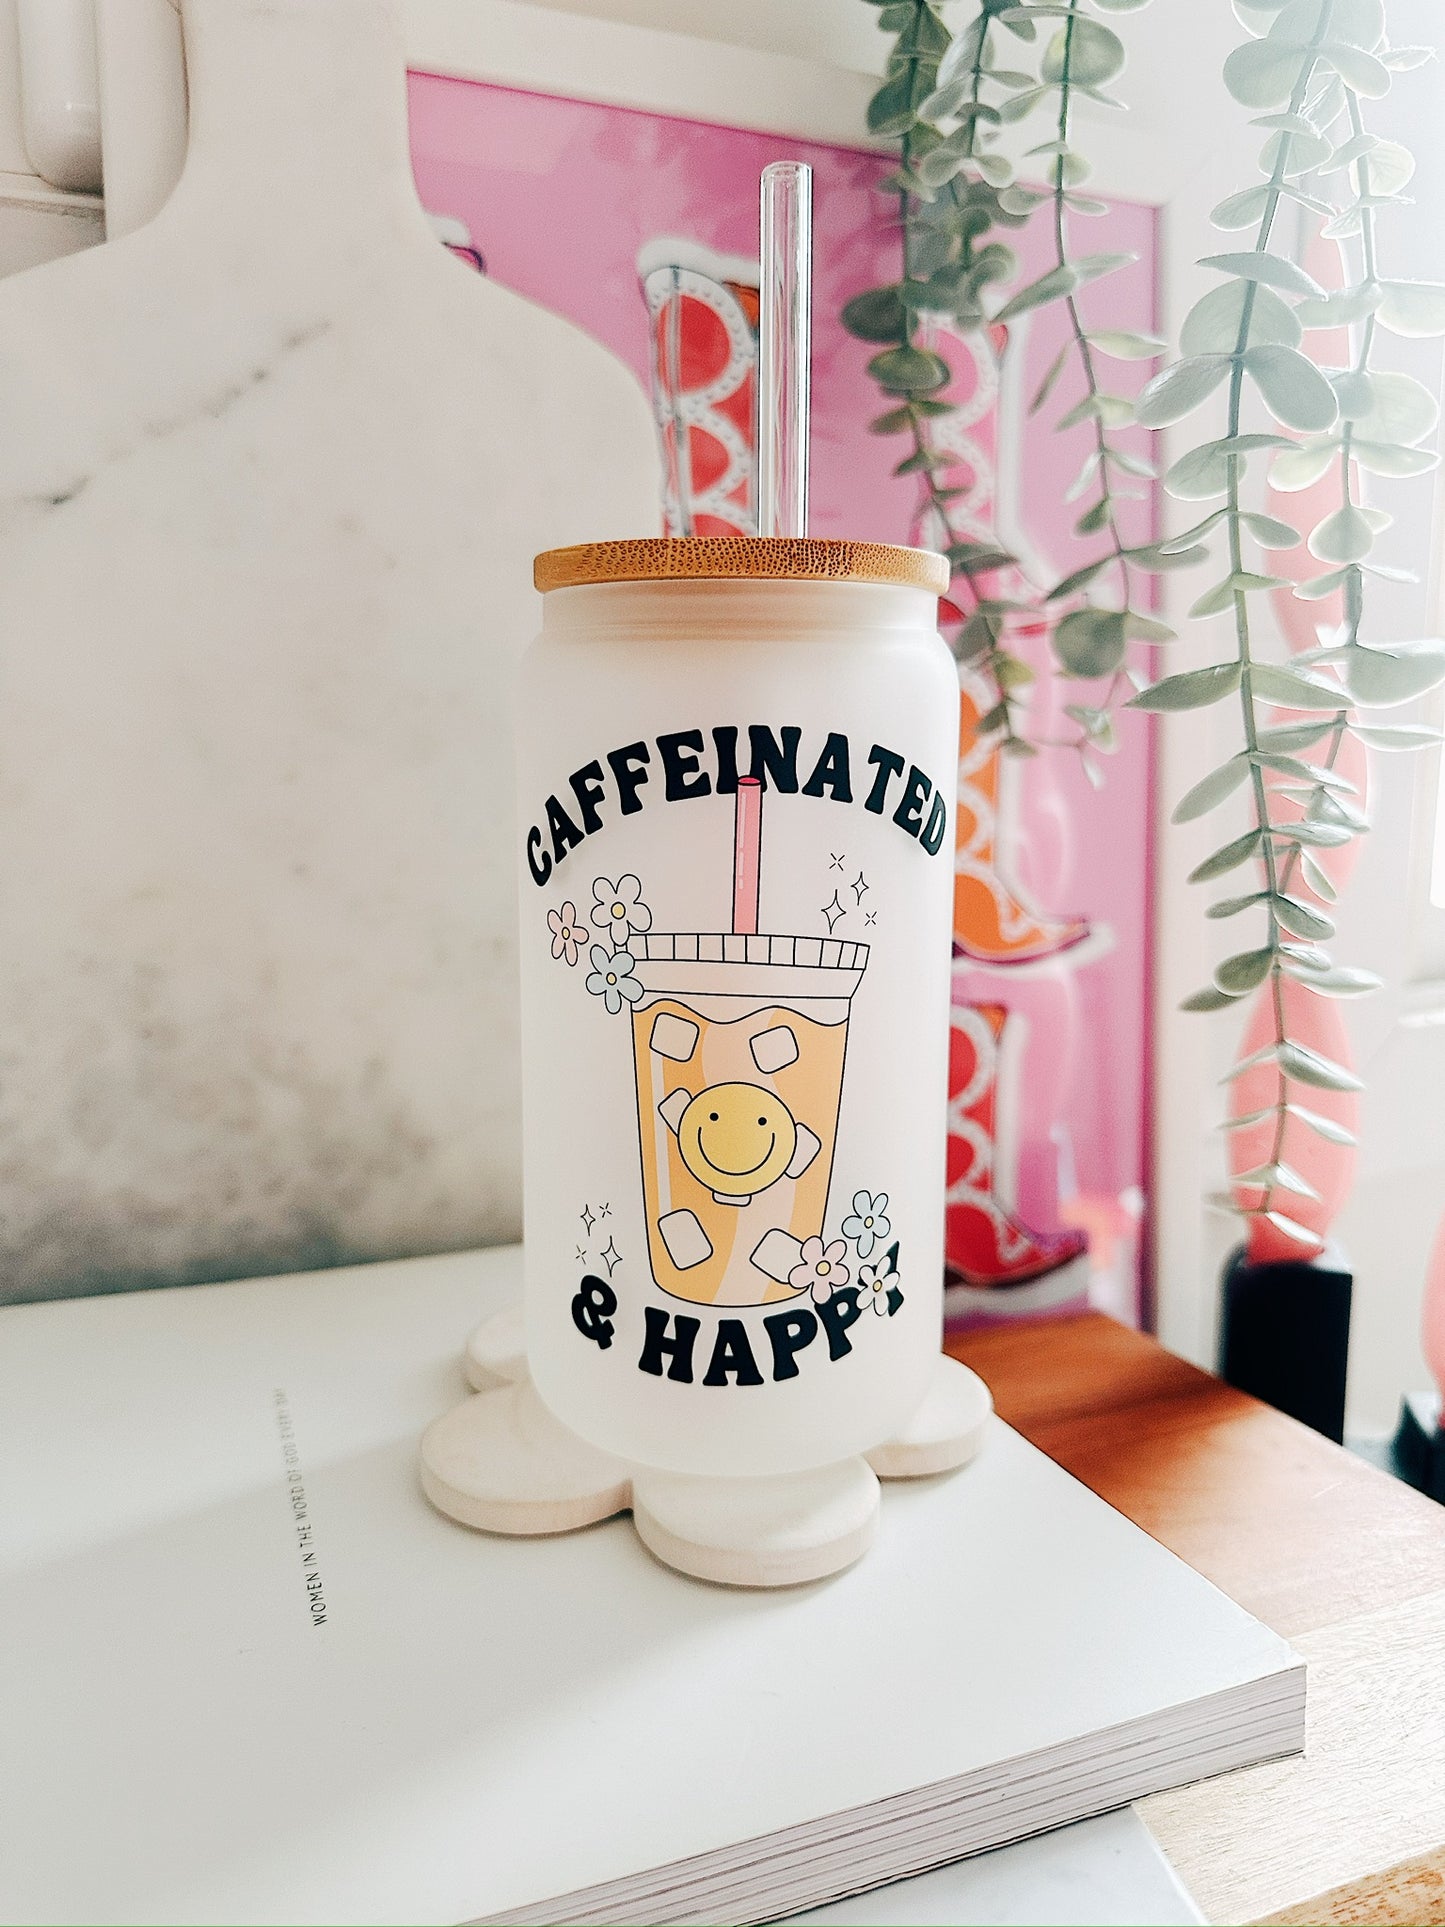 Caffeinated and Happy - Libbey Glass tumbler